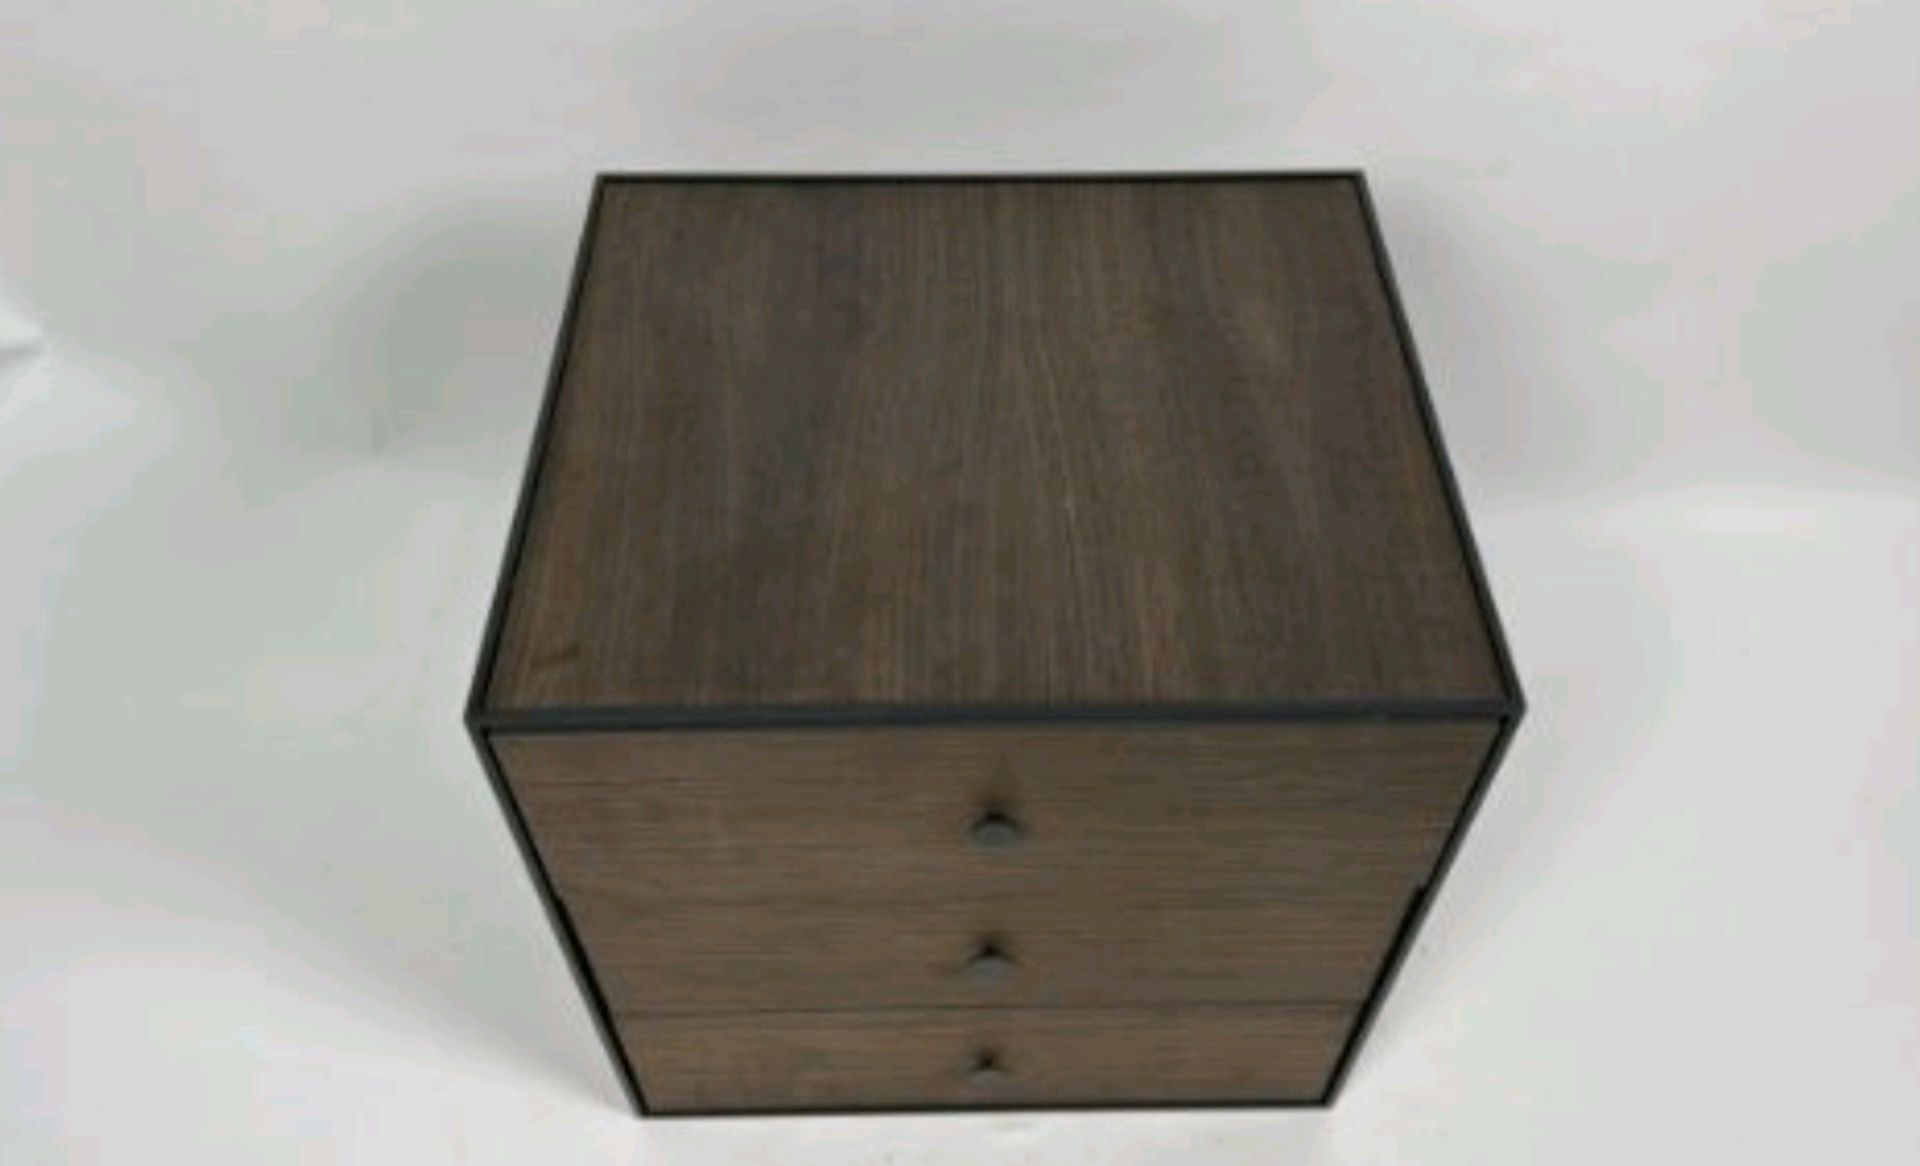 49 Smoked Oak Frame Box with 3 Drawers by Lassen - Image 2 of 4